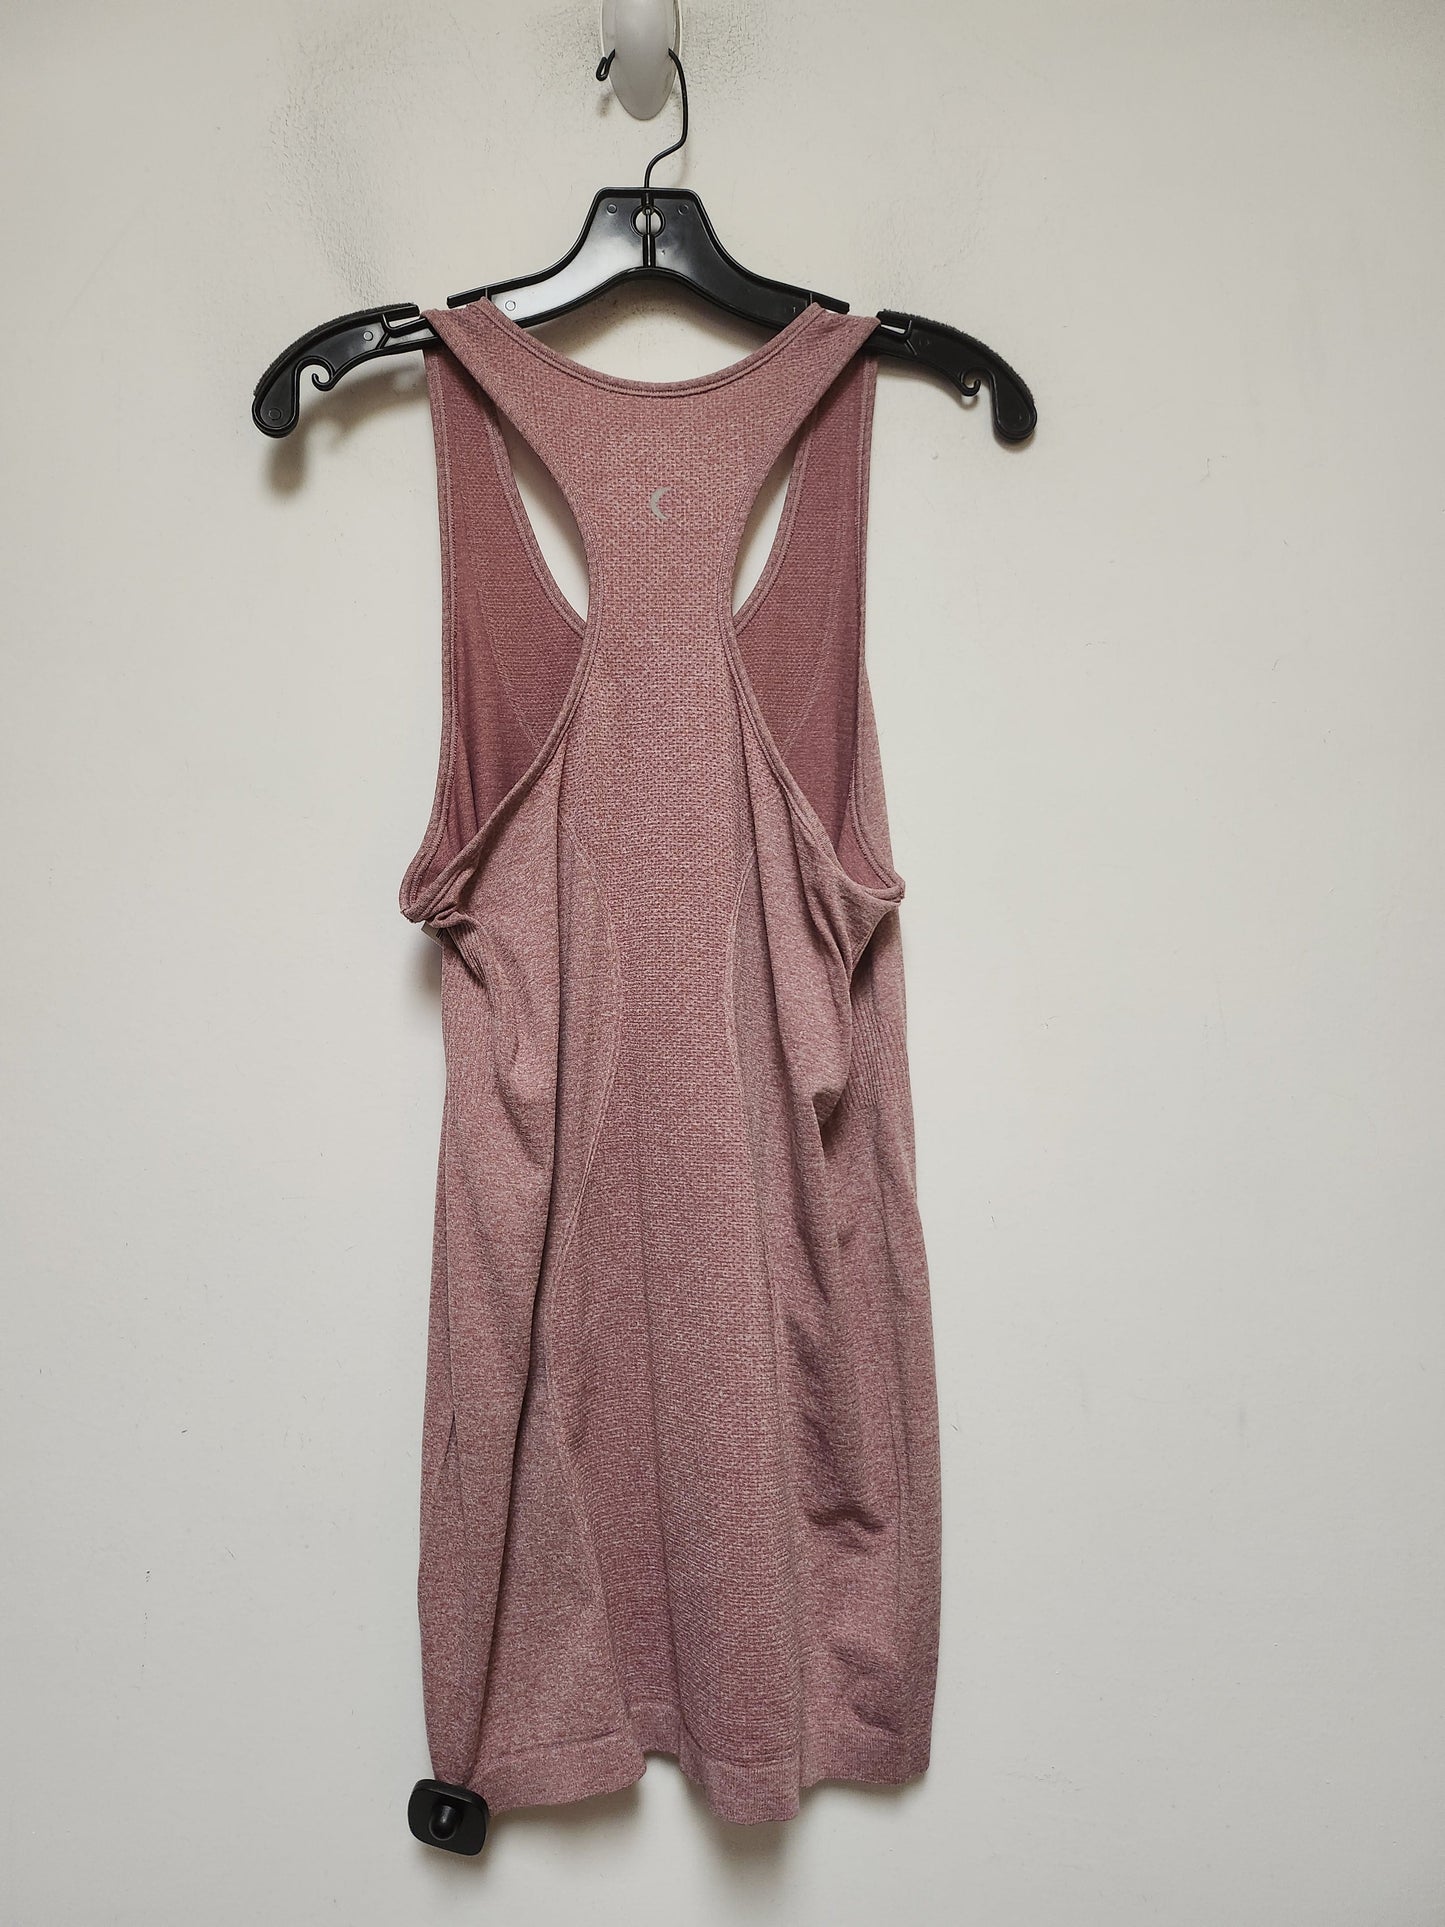 Pink Athletic Tank Top Zyia, Size M